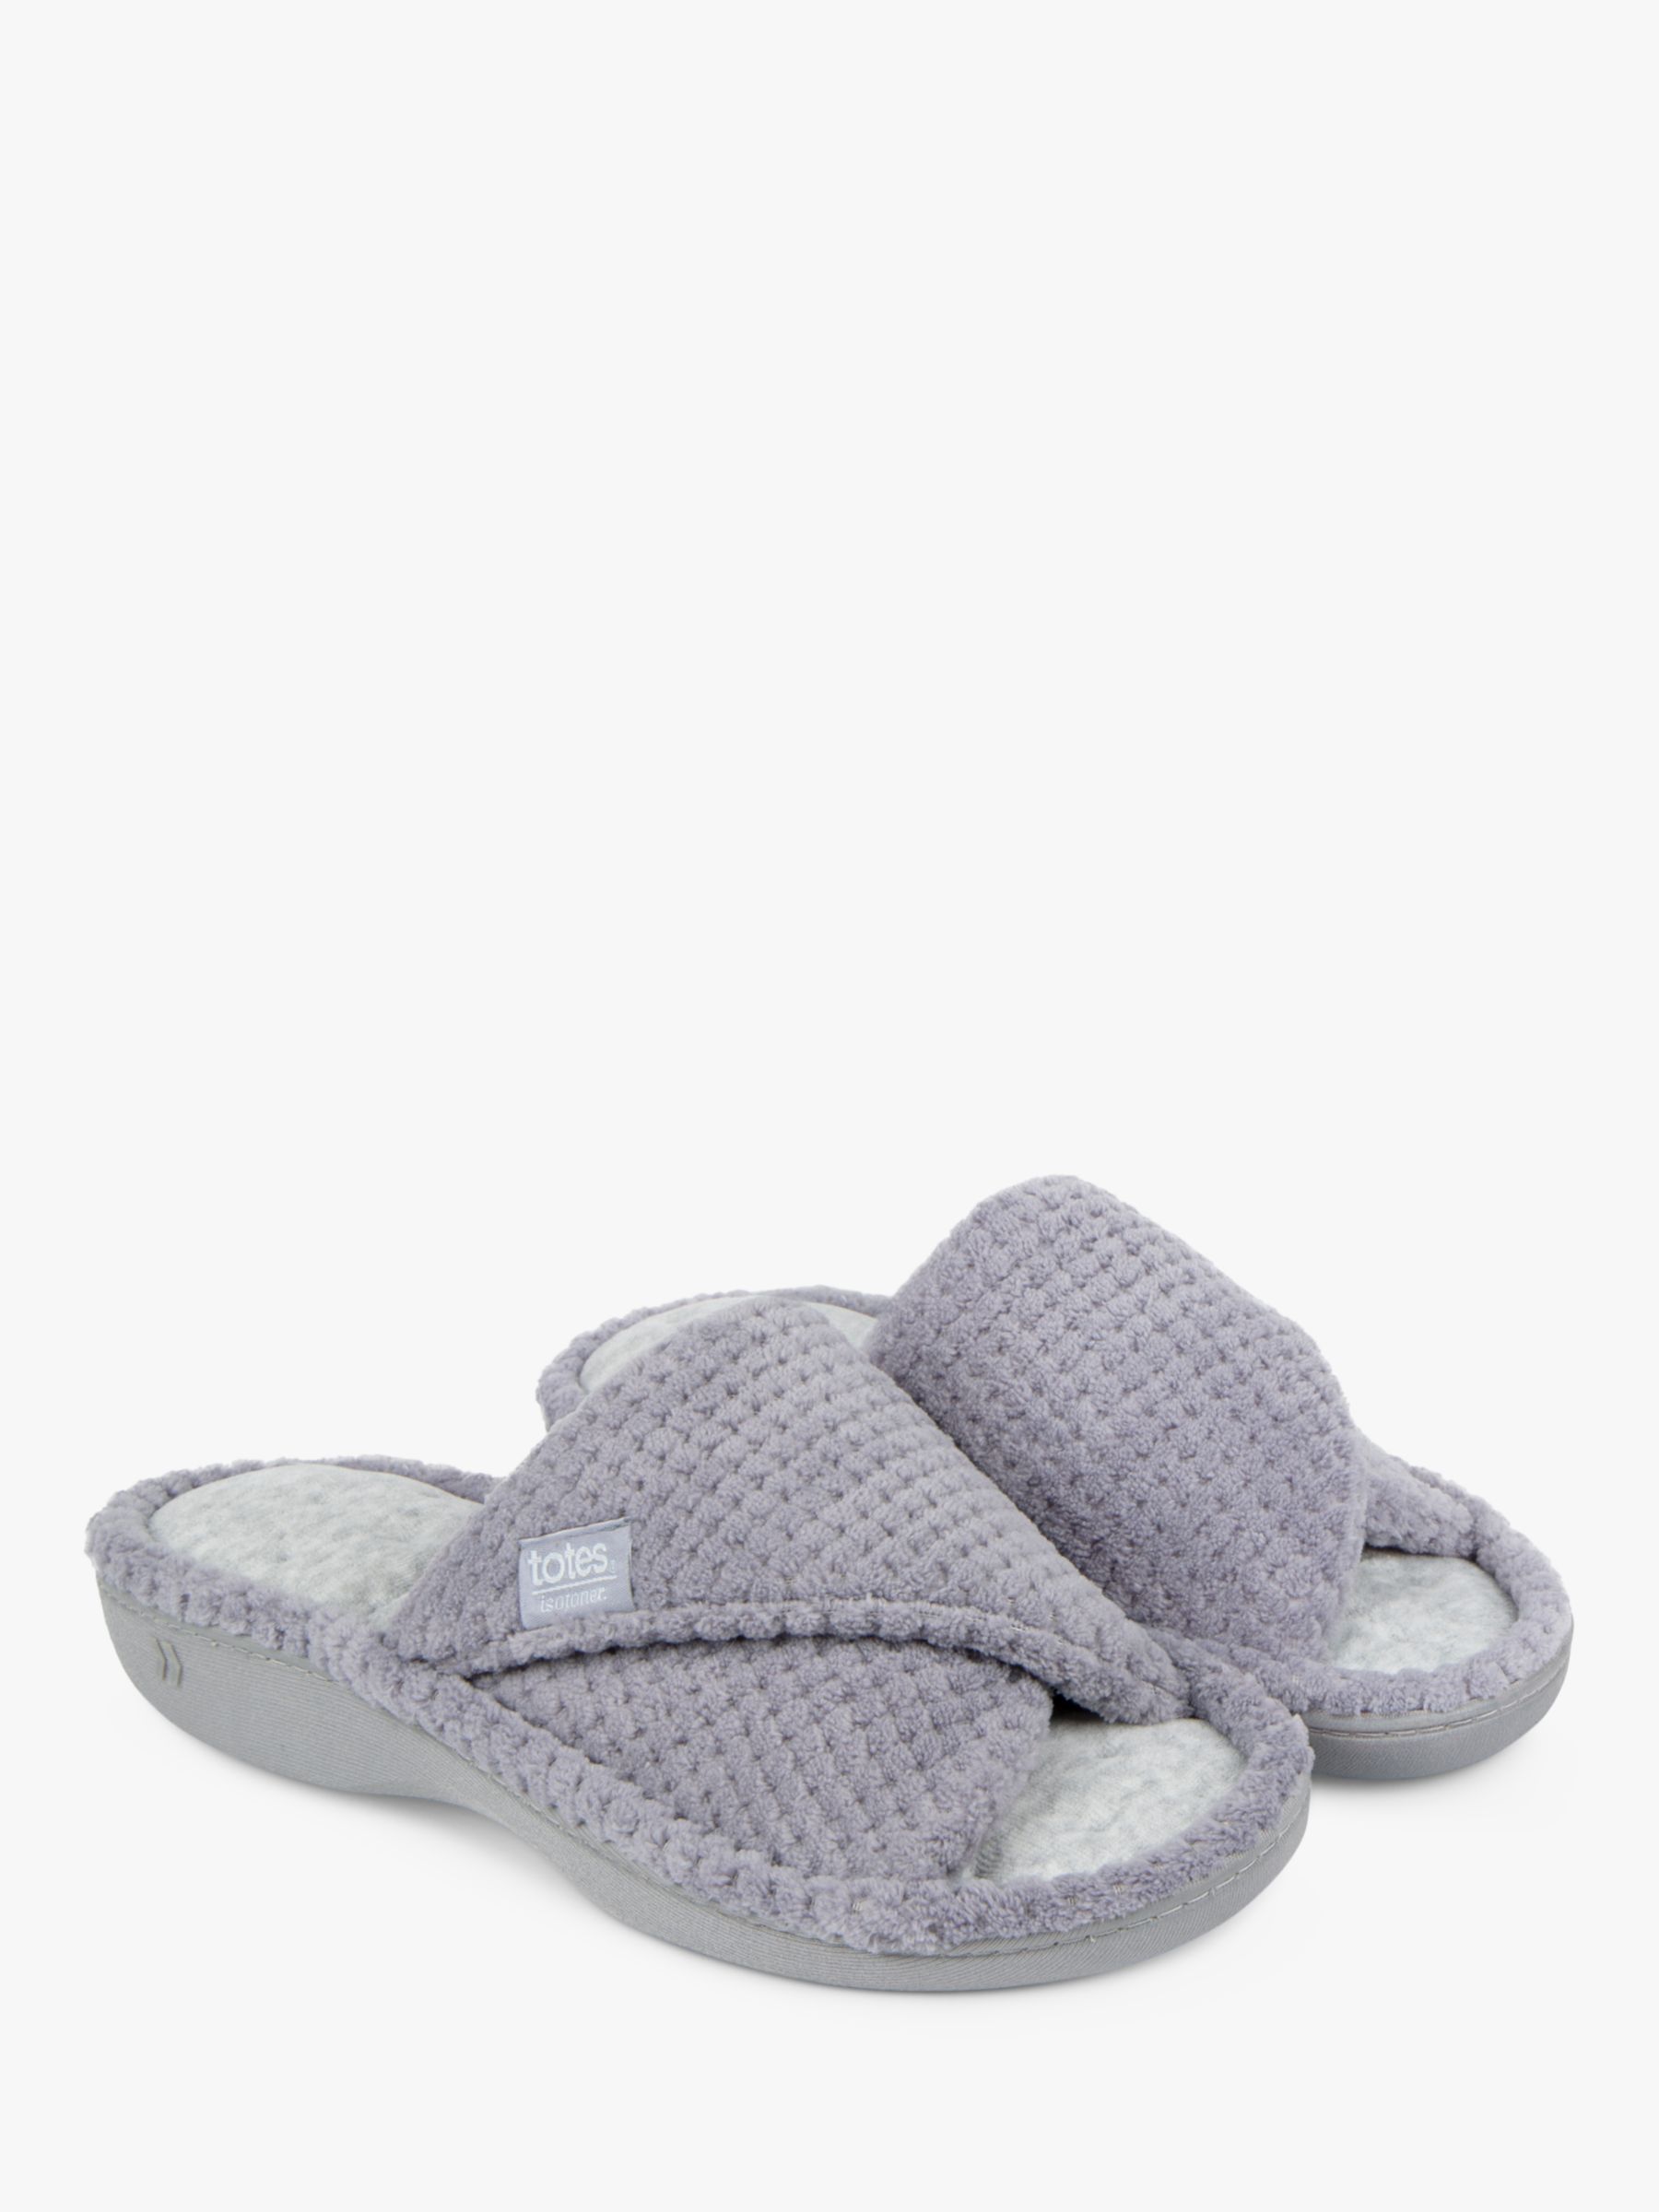 totes Textured Popcorn Turnover Mule Slippers, Pale Grey, 4